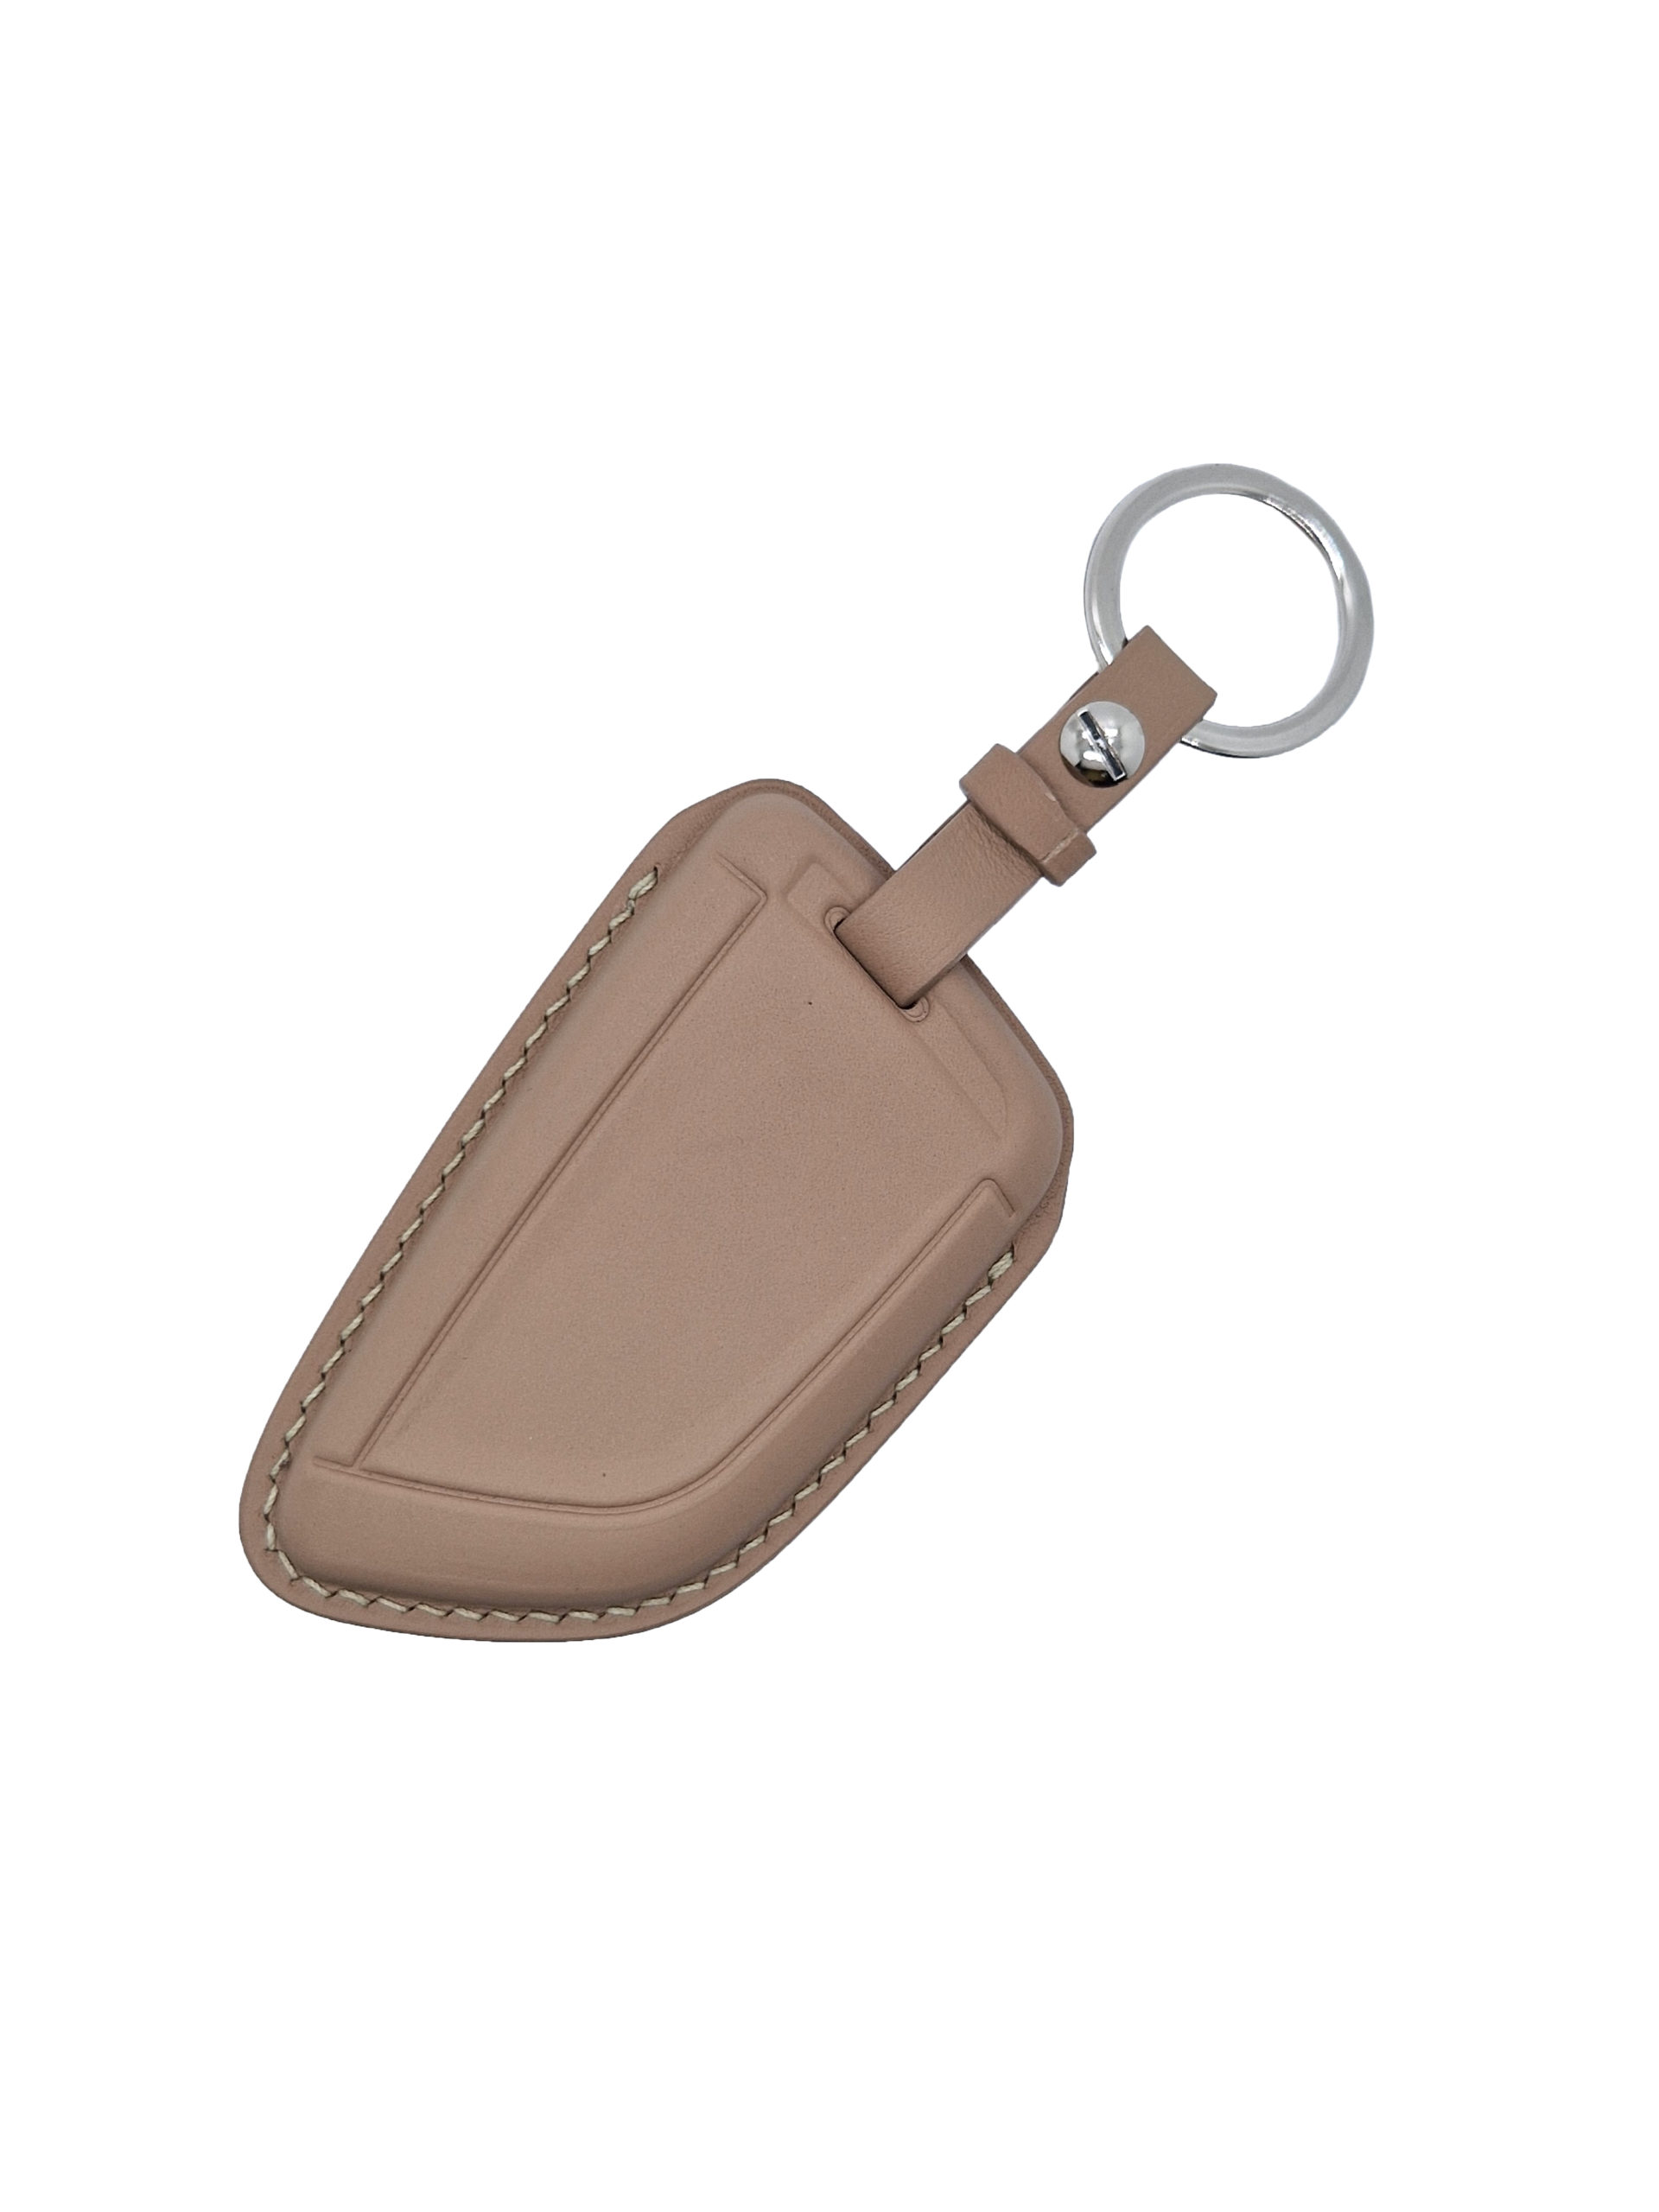 BMW leather key pouch B2-AV1 - Timotheus Switzerland - handmade key pouch  in leather for your car